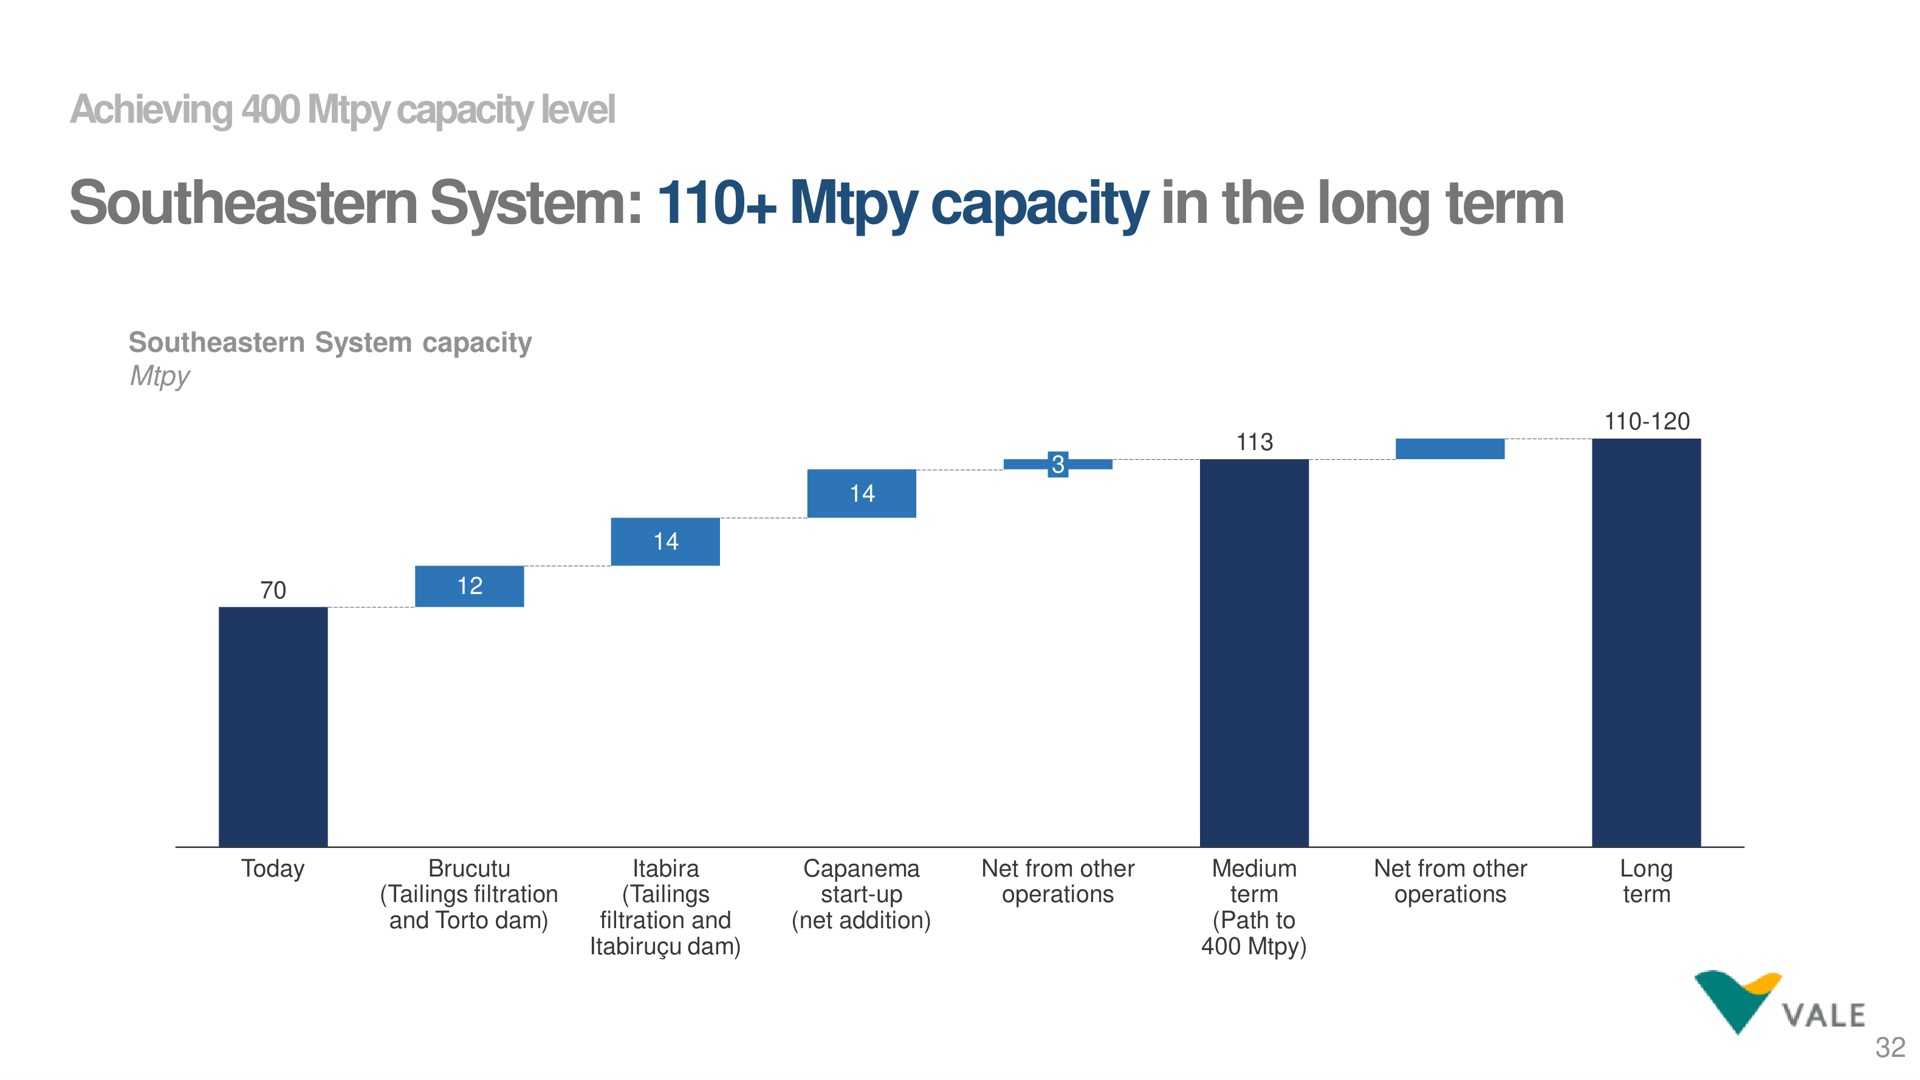 southeastern system capacity in the long term vale | Vale